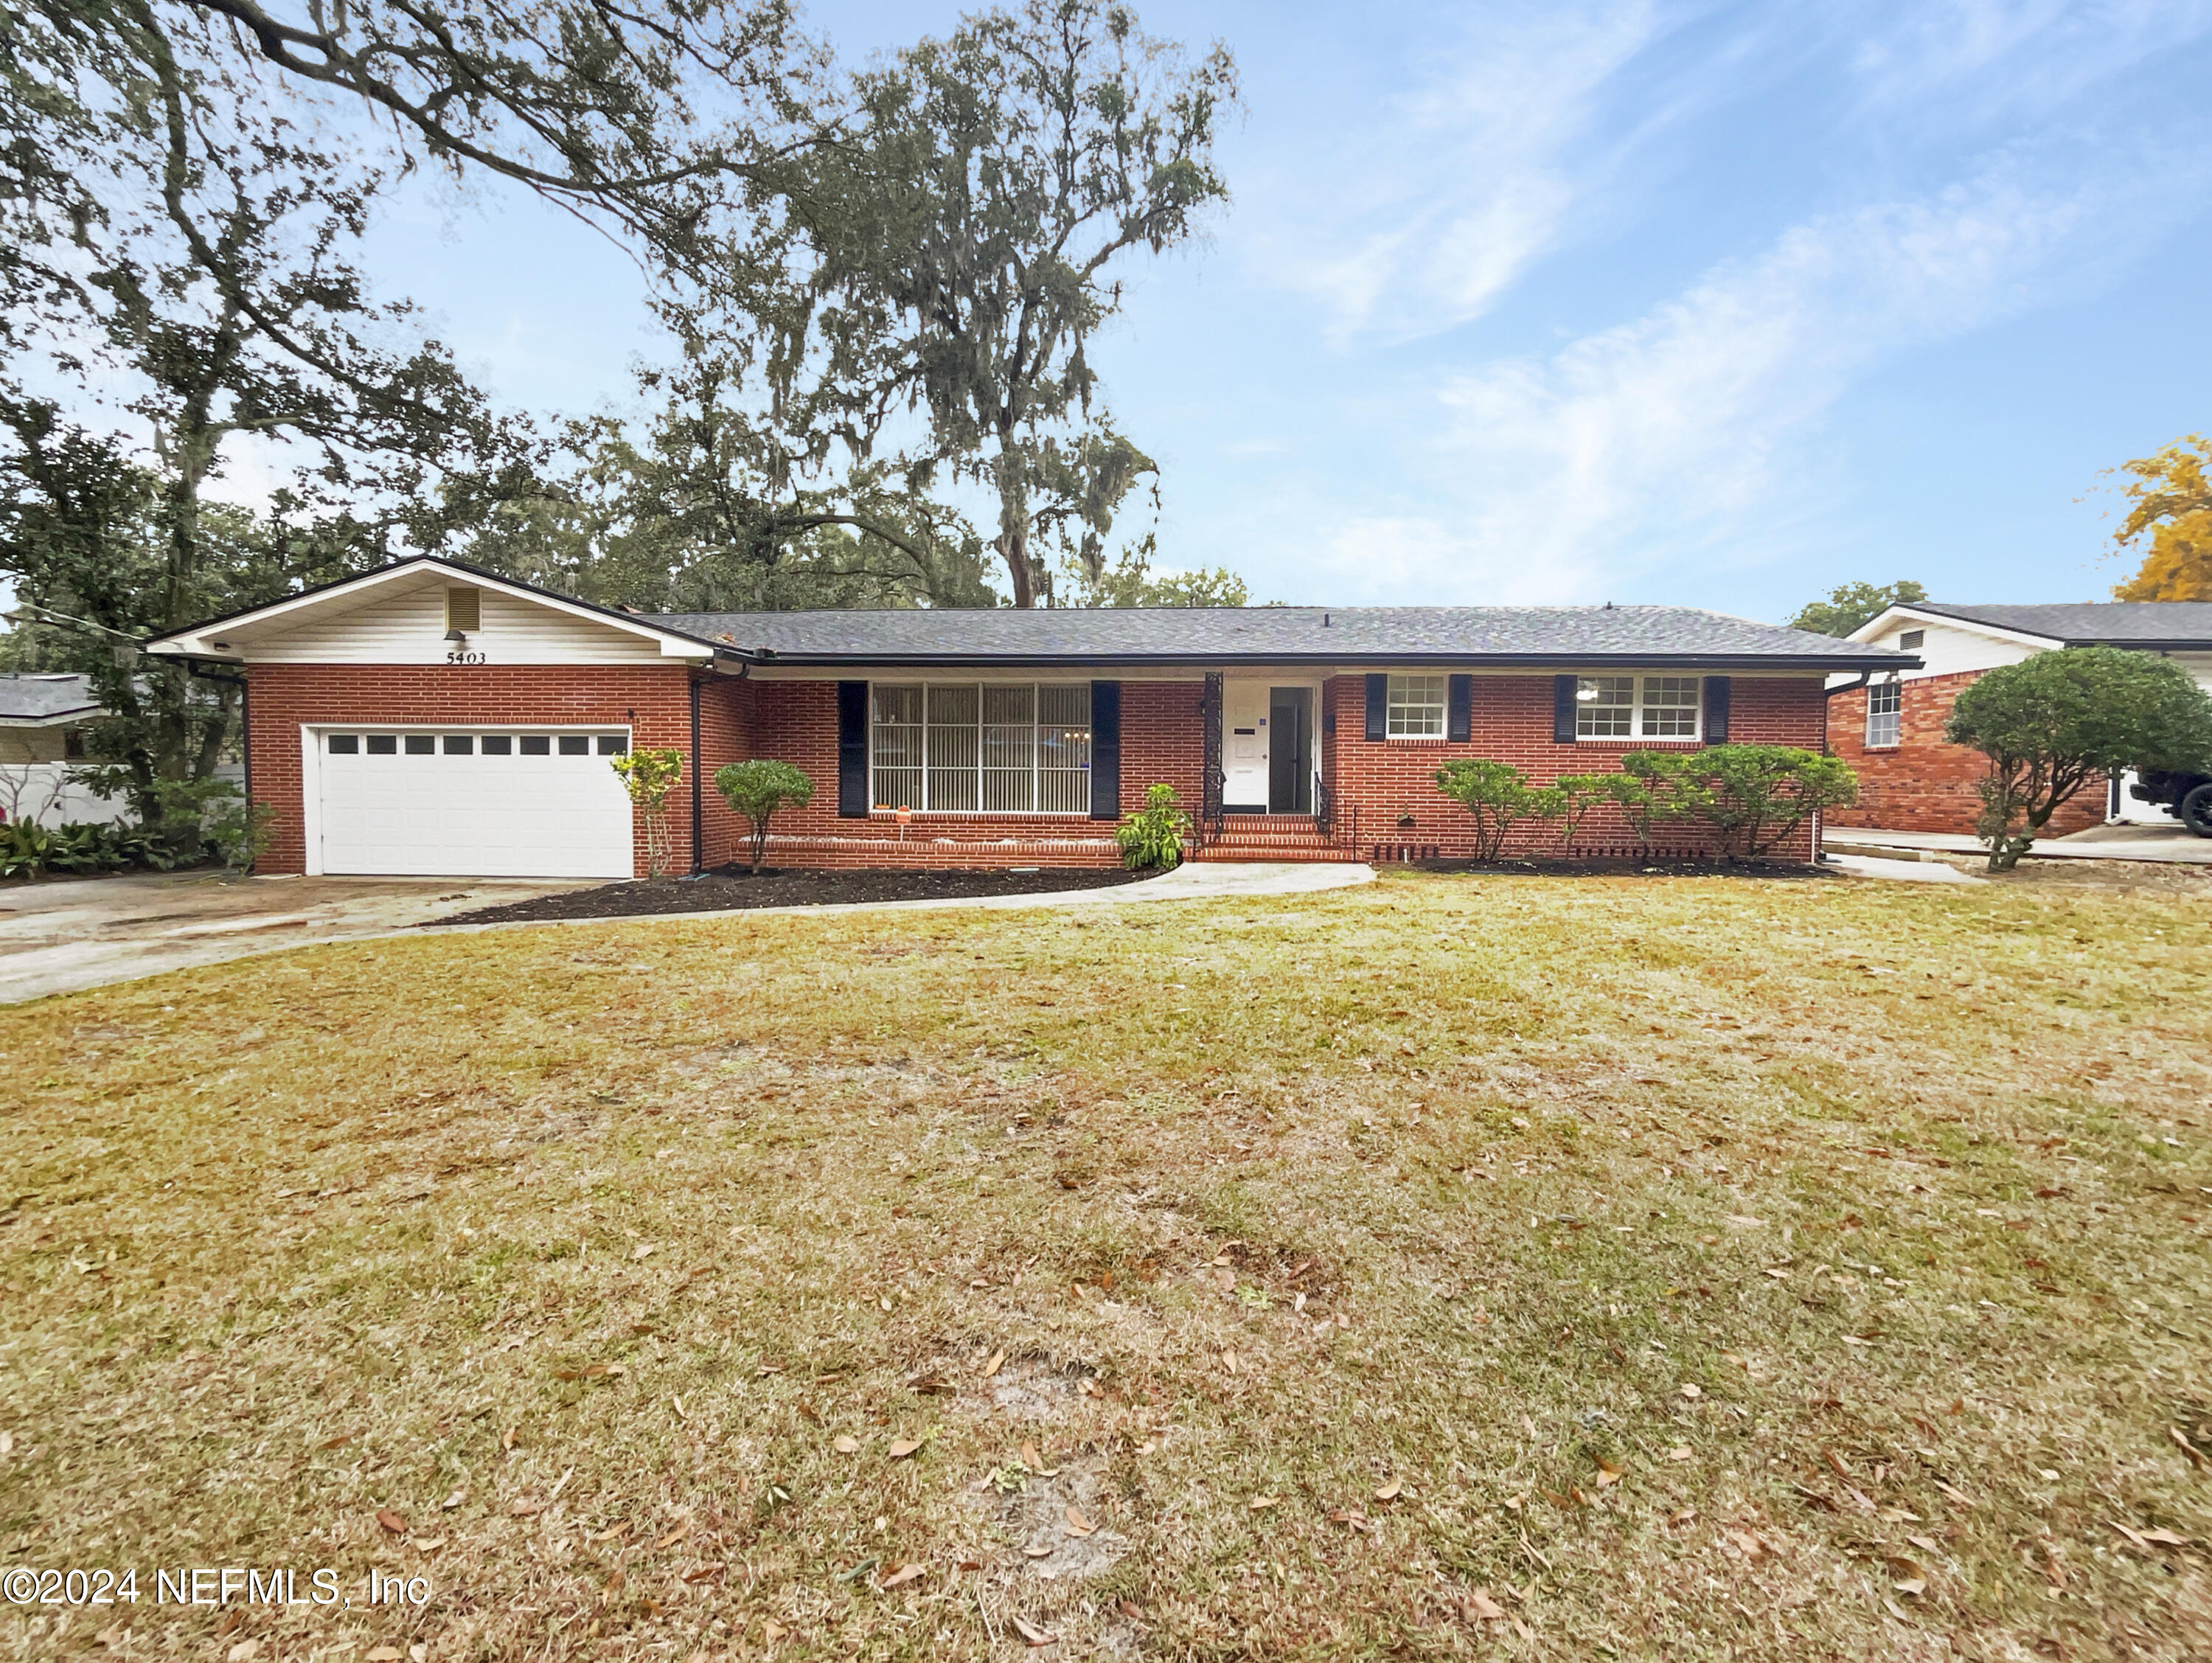 Jacksonville, FL home for sale located at 5403 Coppedge Avenue, Jacksonville, FL 32277